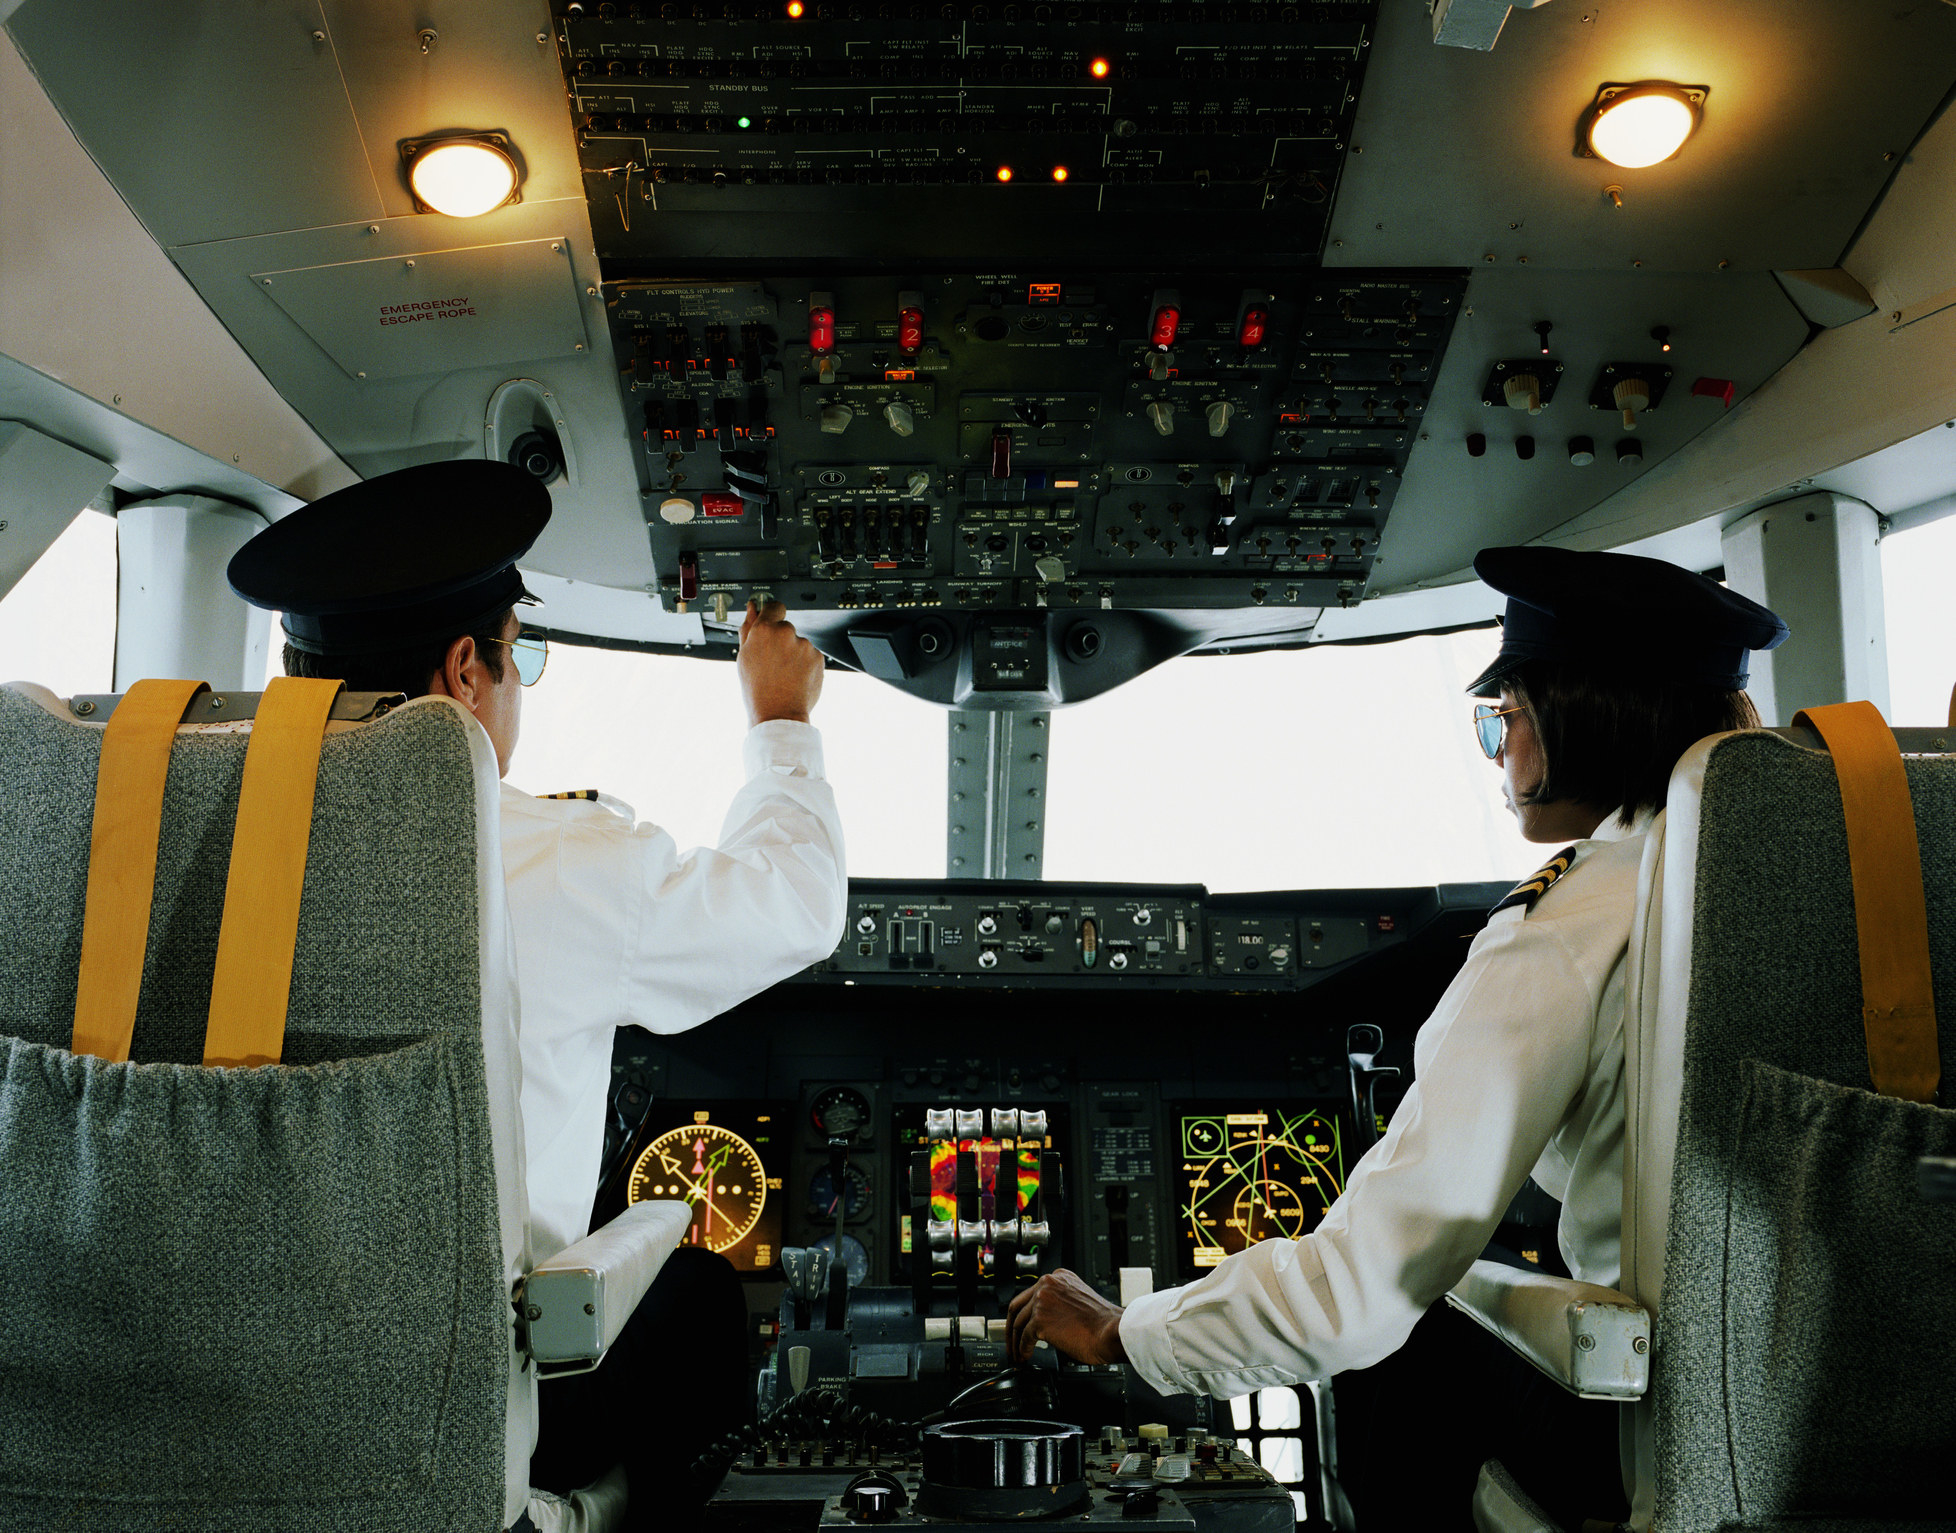 Two pilots in the cockpit monitoring the system